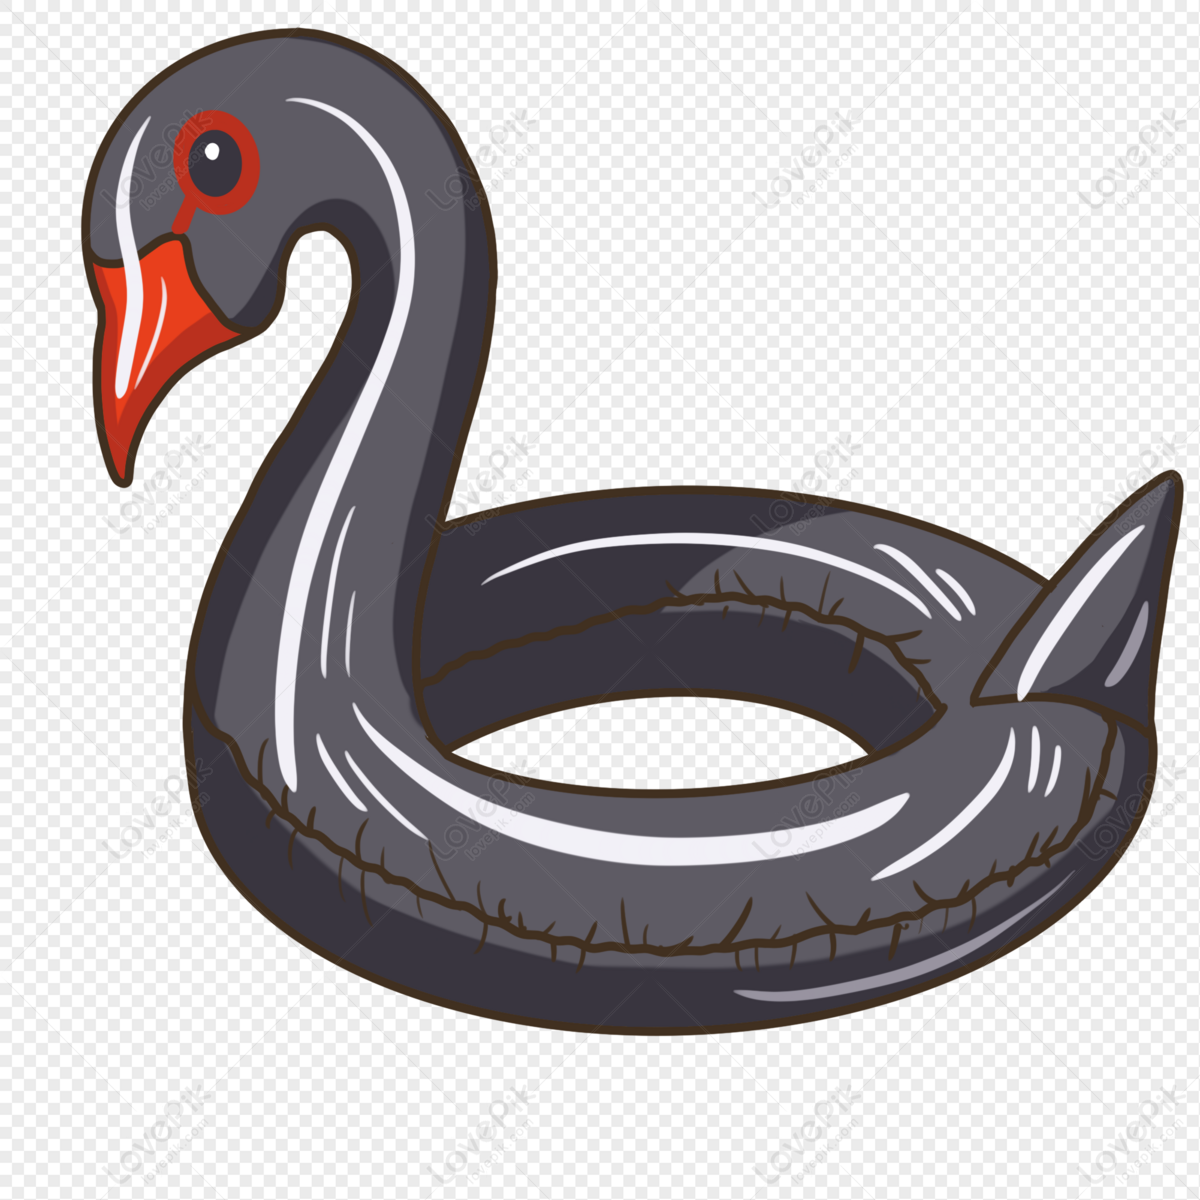 Cartoon Black Swan Swimming Ring PNG Picture And Clipart Image For Free  Download - Lovepik | 401425355